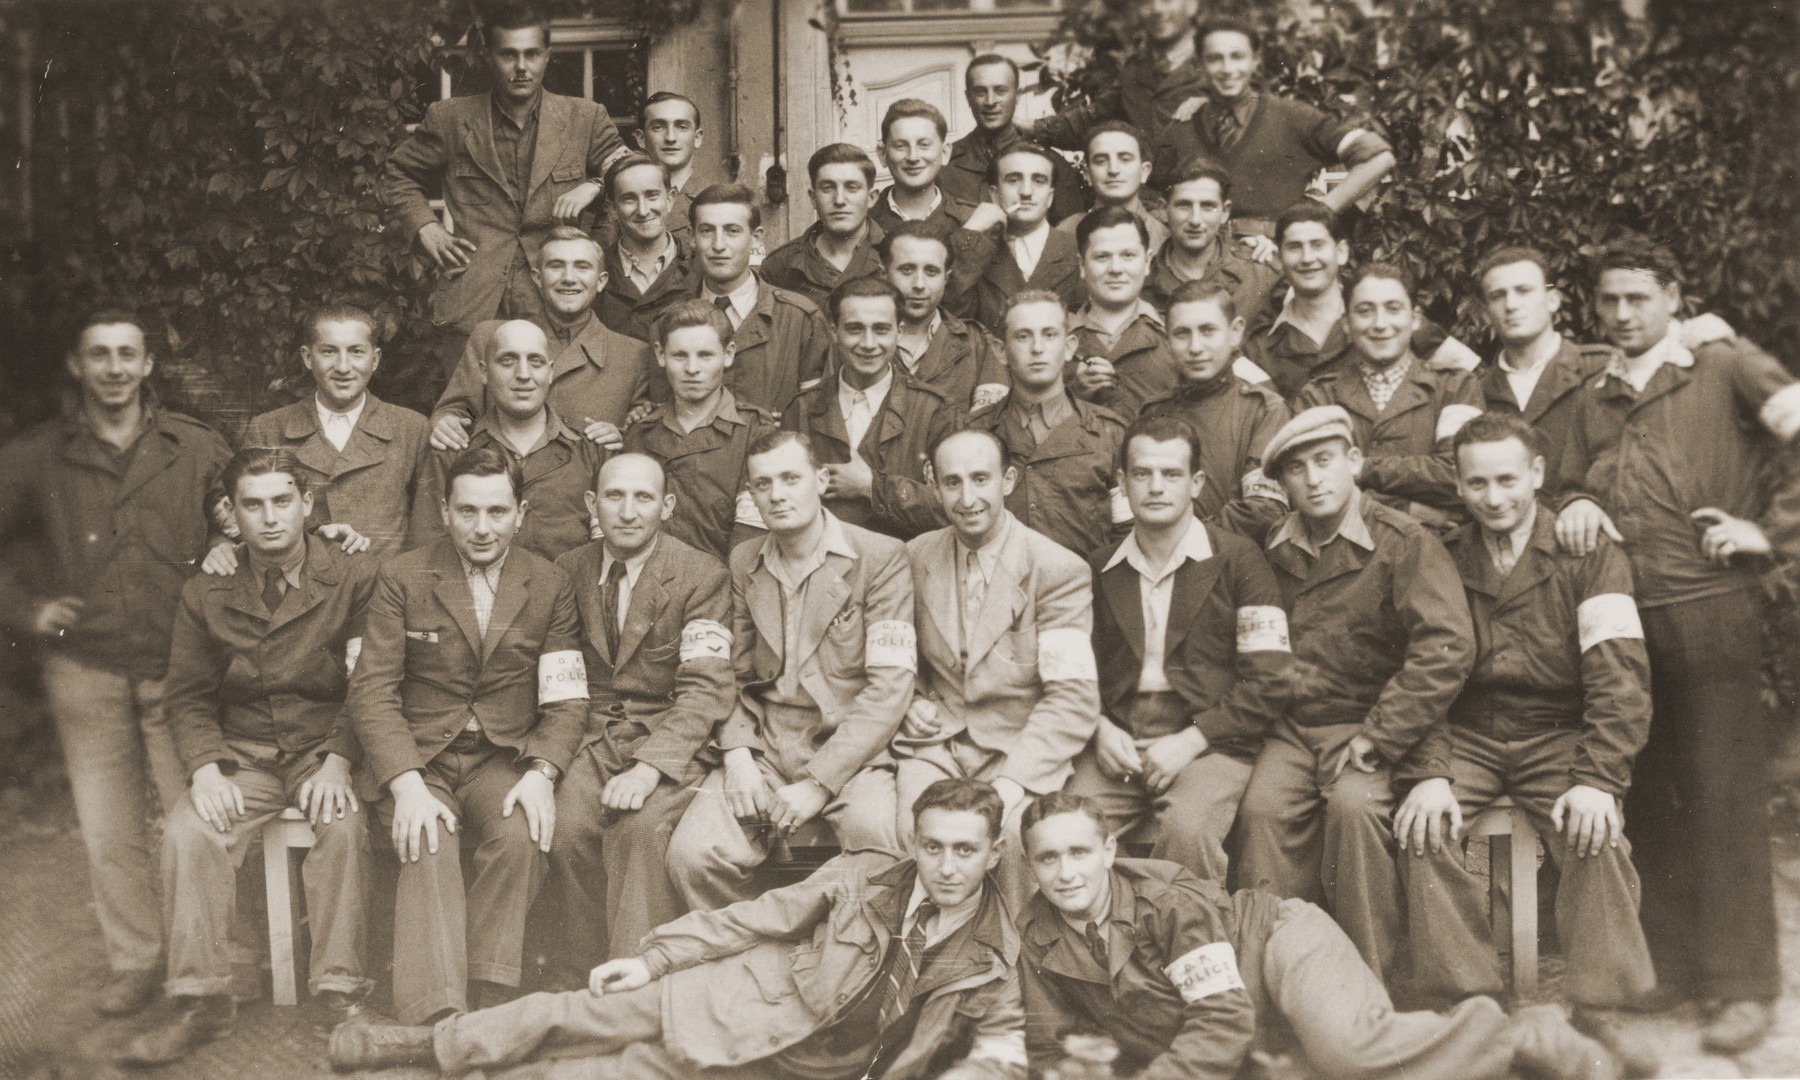 Group portrait of Jewish police in the Landsberg displaced persons camp.

Among those pictured is Moshe (Morris) Barkowski, in the third row (first row standing), fifth from the left. Henry Vogelhut is pictured in the center back, with a short mustache and a cigarette in his mouth.